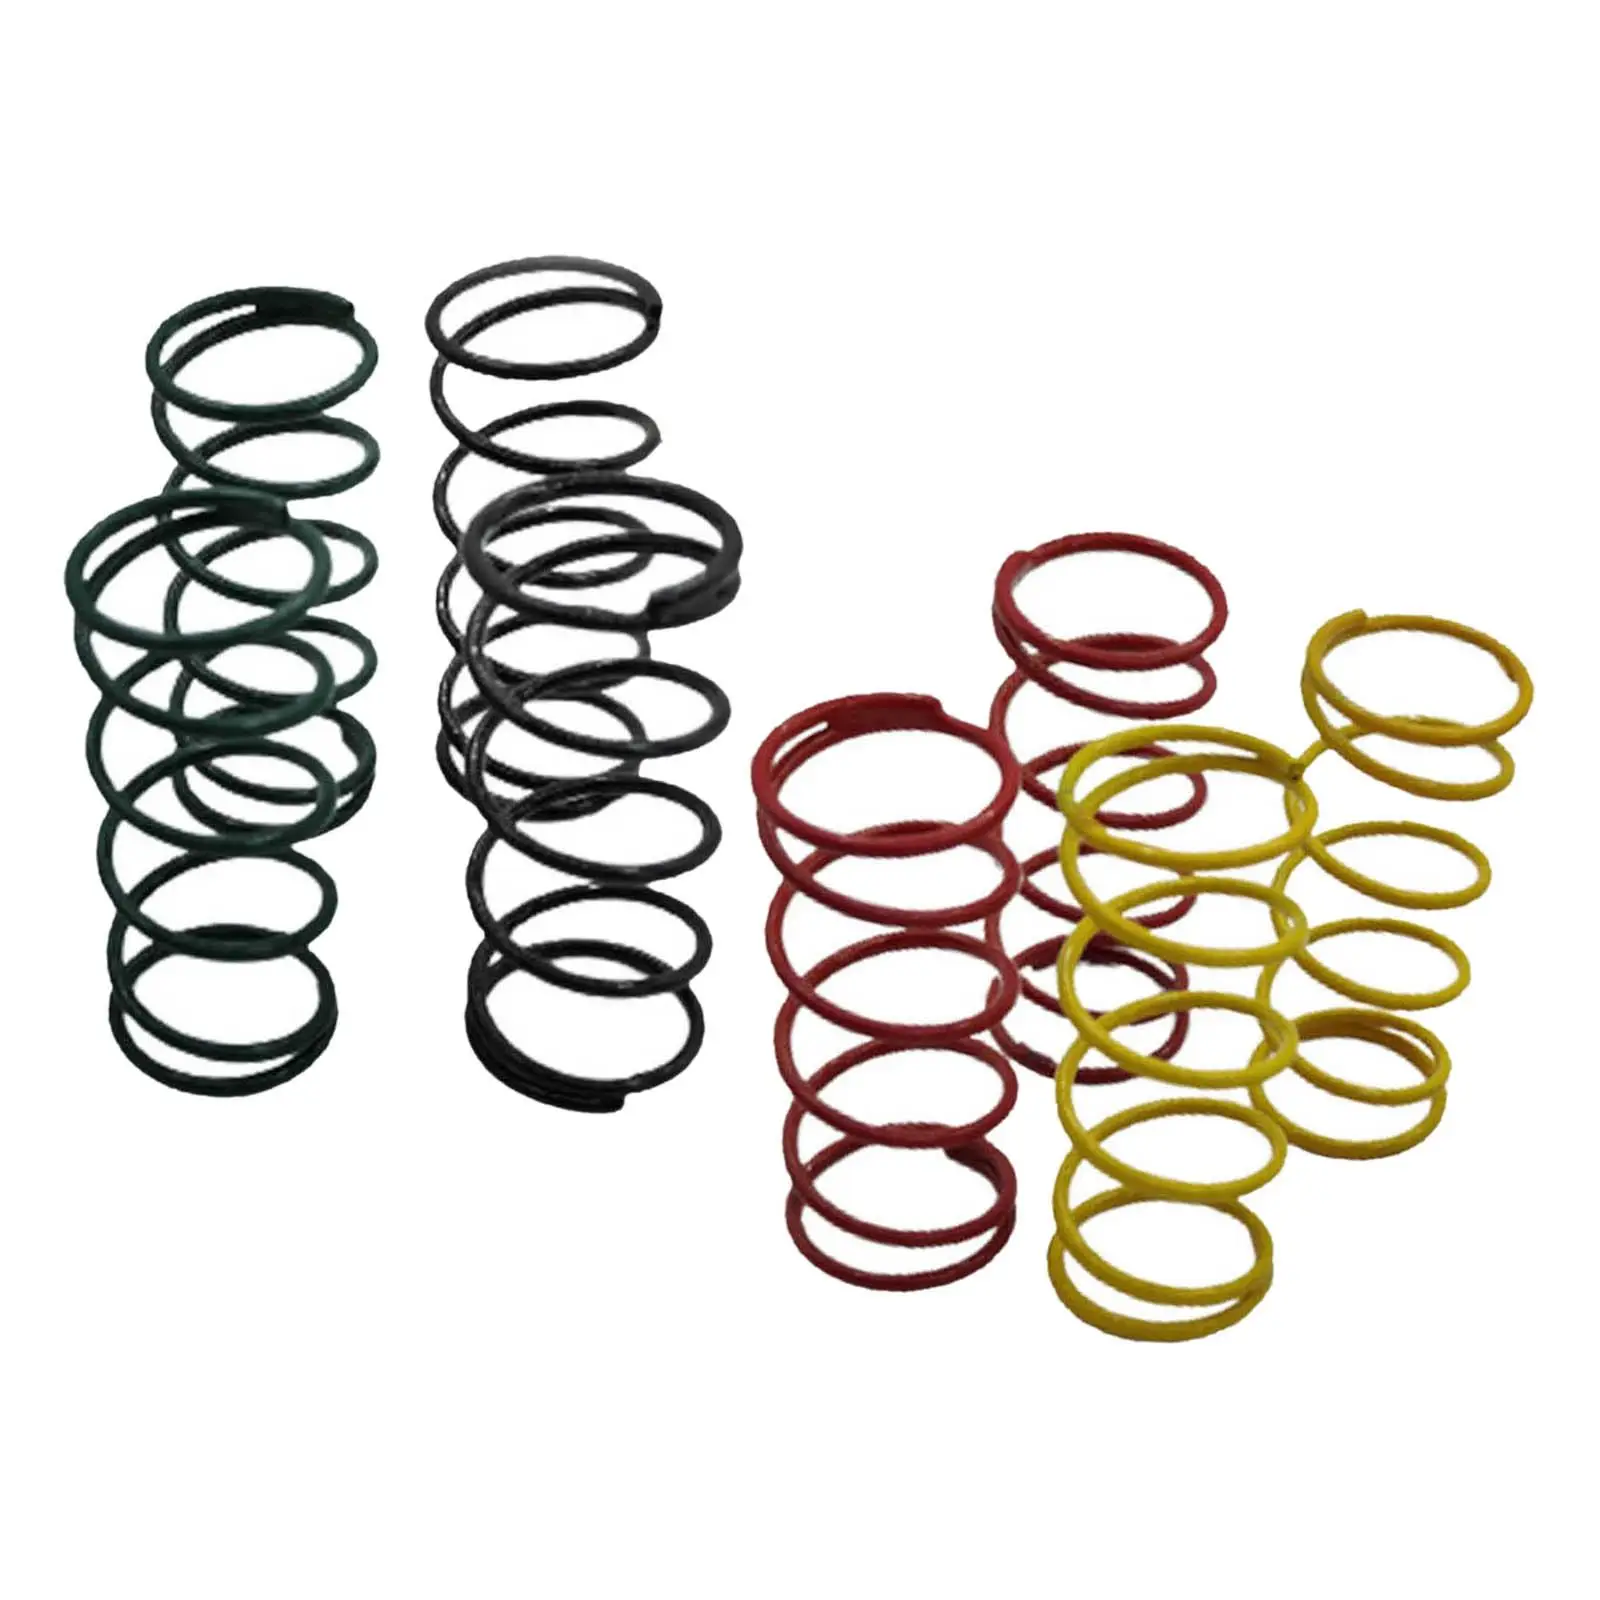 8x Big Bore Shock Spring Set 80mm Iron Extension Spring for RC Vehicles for Traxxas Truck